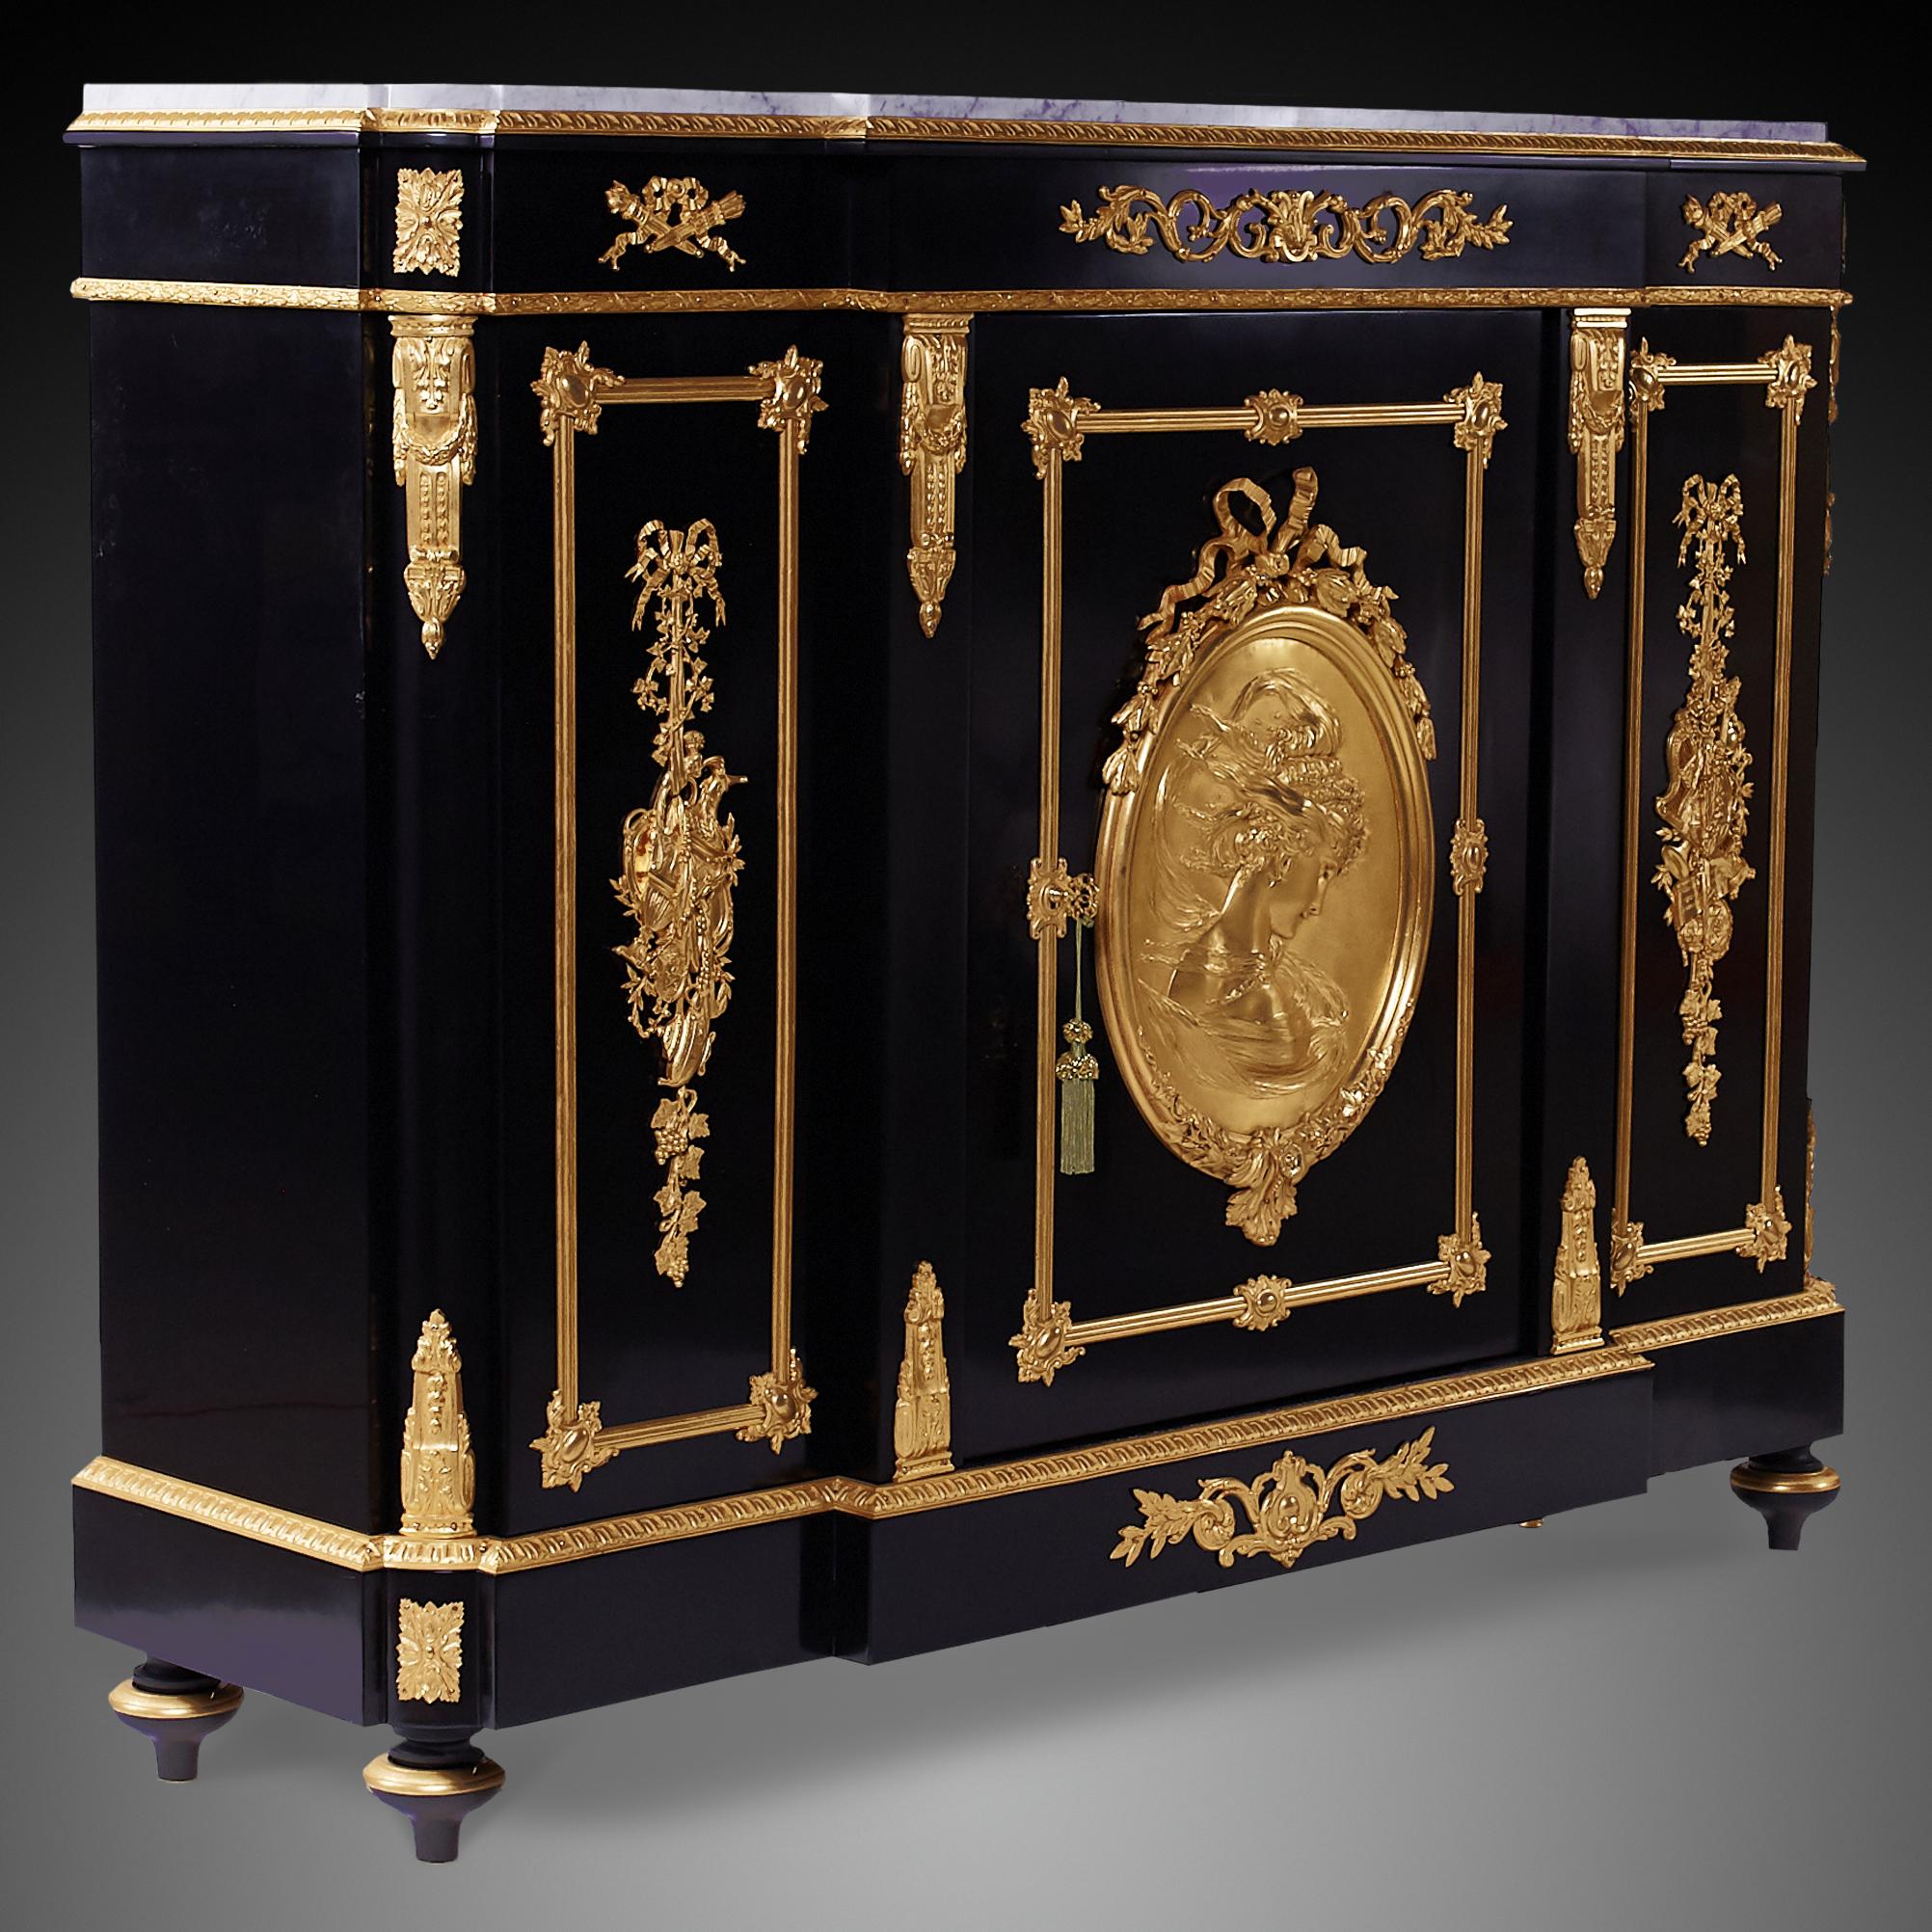 This magnificent cabinet was crafted in the Napoleon III style inspired by ancient Roman art in Paris by Charles Guillaume Diehl titled Diehl 19 r Michel-le-Comte PARIS. Many textures on the cabinet feature the symmetry of Neoclassicism. The cabinet